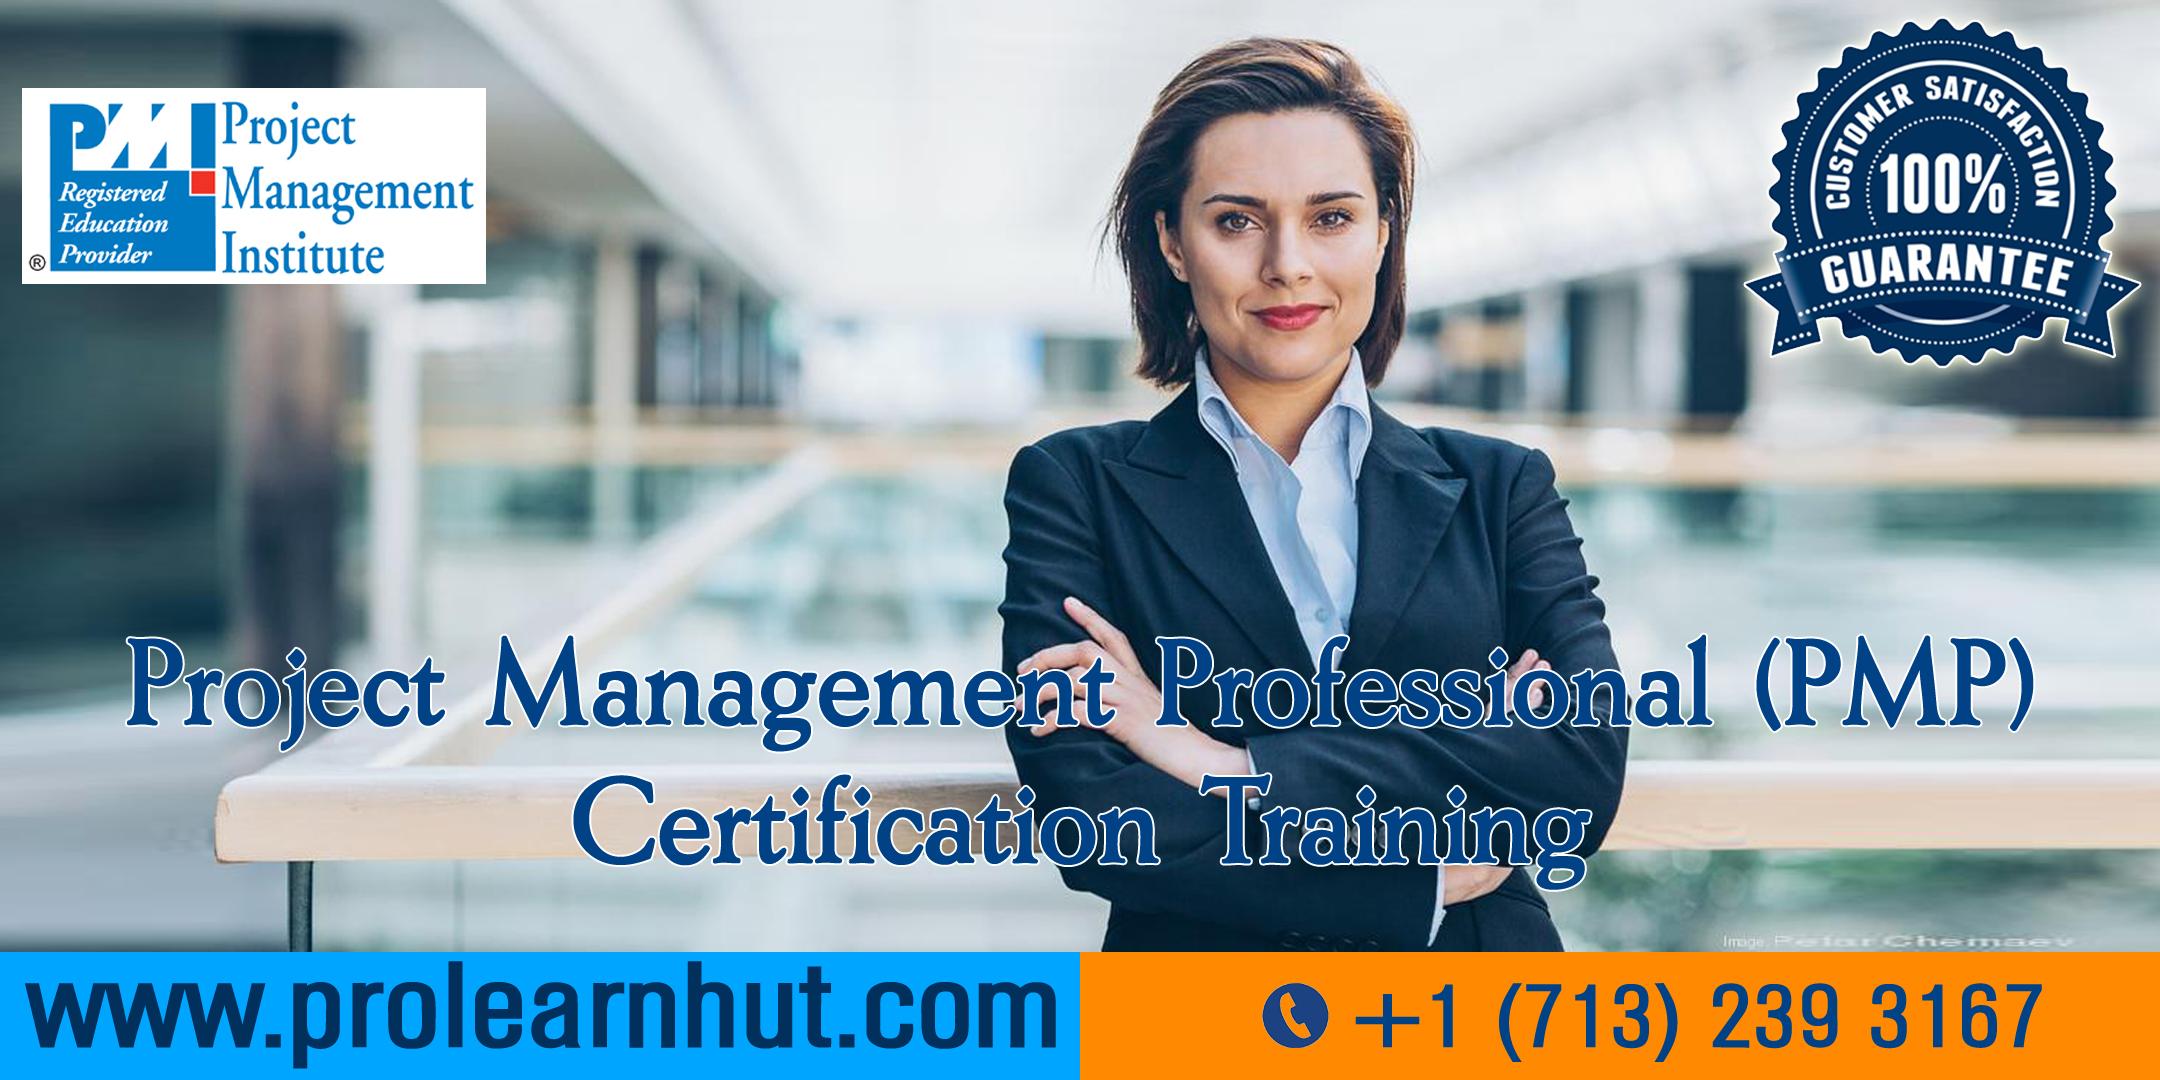 PMP Certification | Project Management Certification| PMP Training in Houston, TX | ProLearnHut